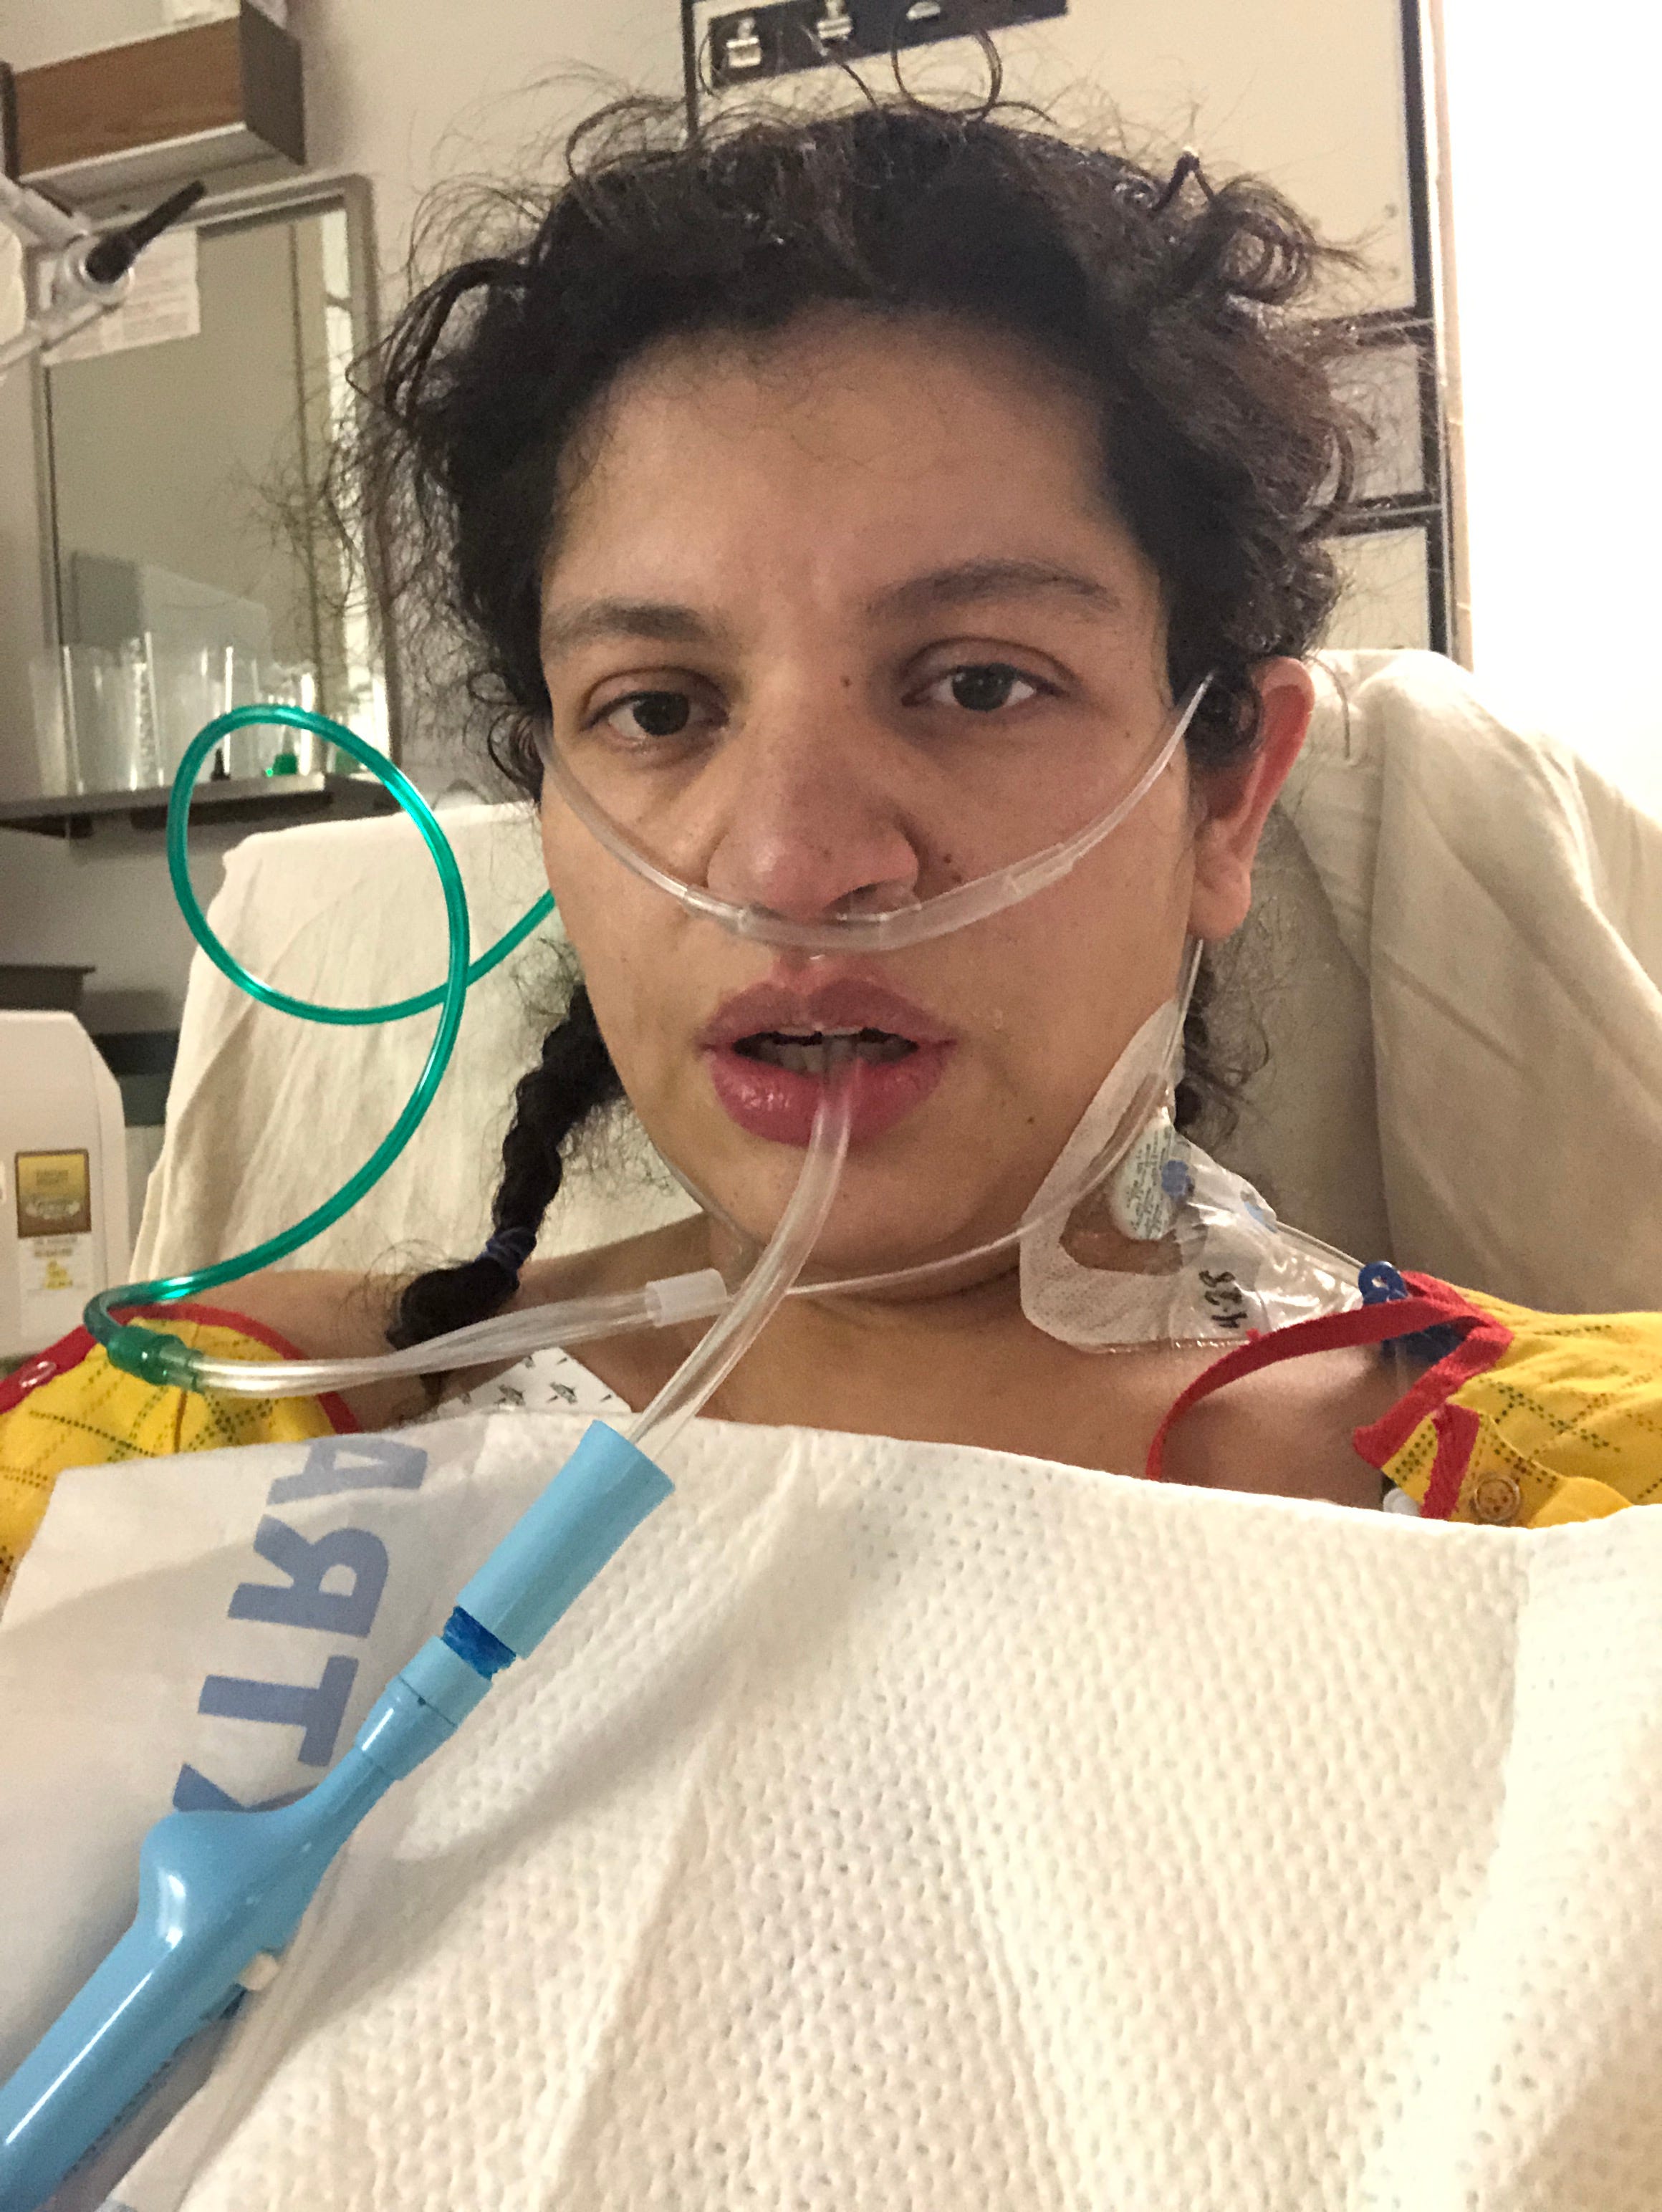 Cyndi Nava remains intubated while recovering from COVID-19 and an emergency c-section at St. Mary's Regional Medical Center in Reno.